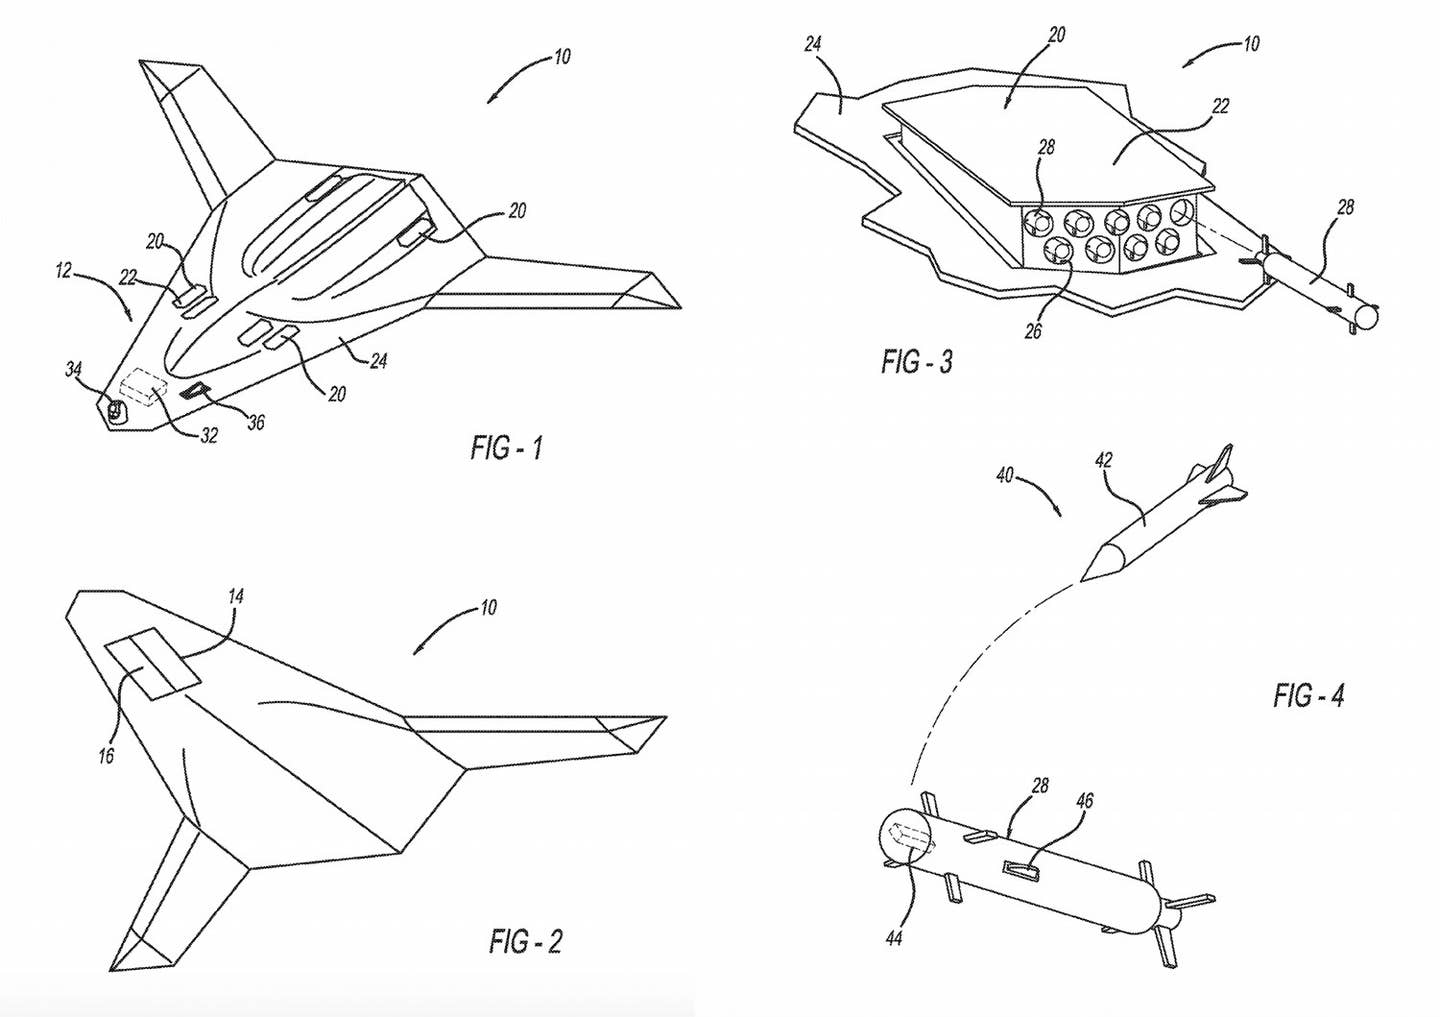 Drawings from Northrop Grumman's patent for an anti-missile system for aircraft, seen depicted installed on what appears to be a stealth uncrewed design. <em>USPTO</em>